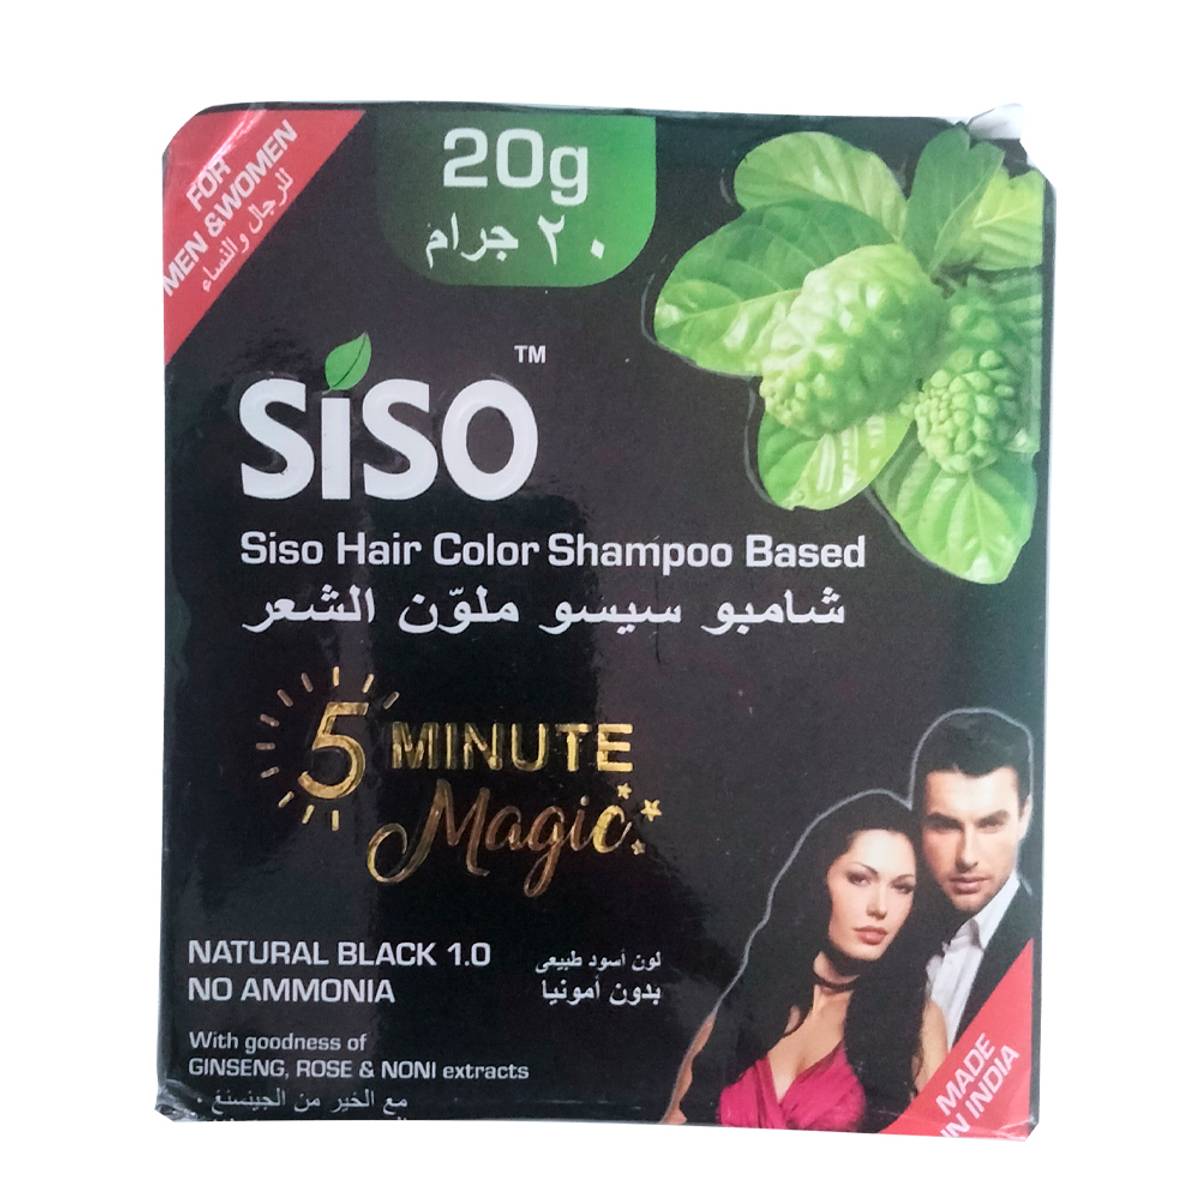 SISO Siso Hair Colur Shampoo | Cococa E-Commerce Private Limited | Buy  online | Buy SISO, Haircare online